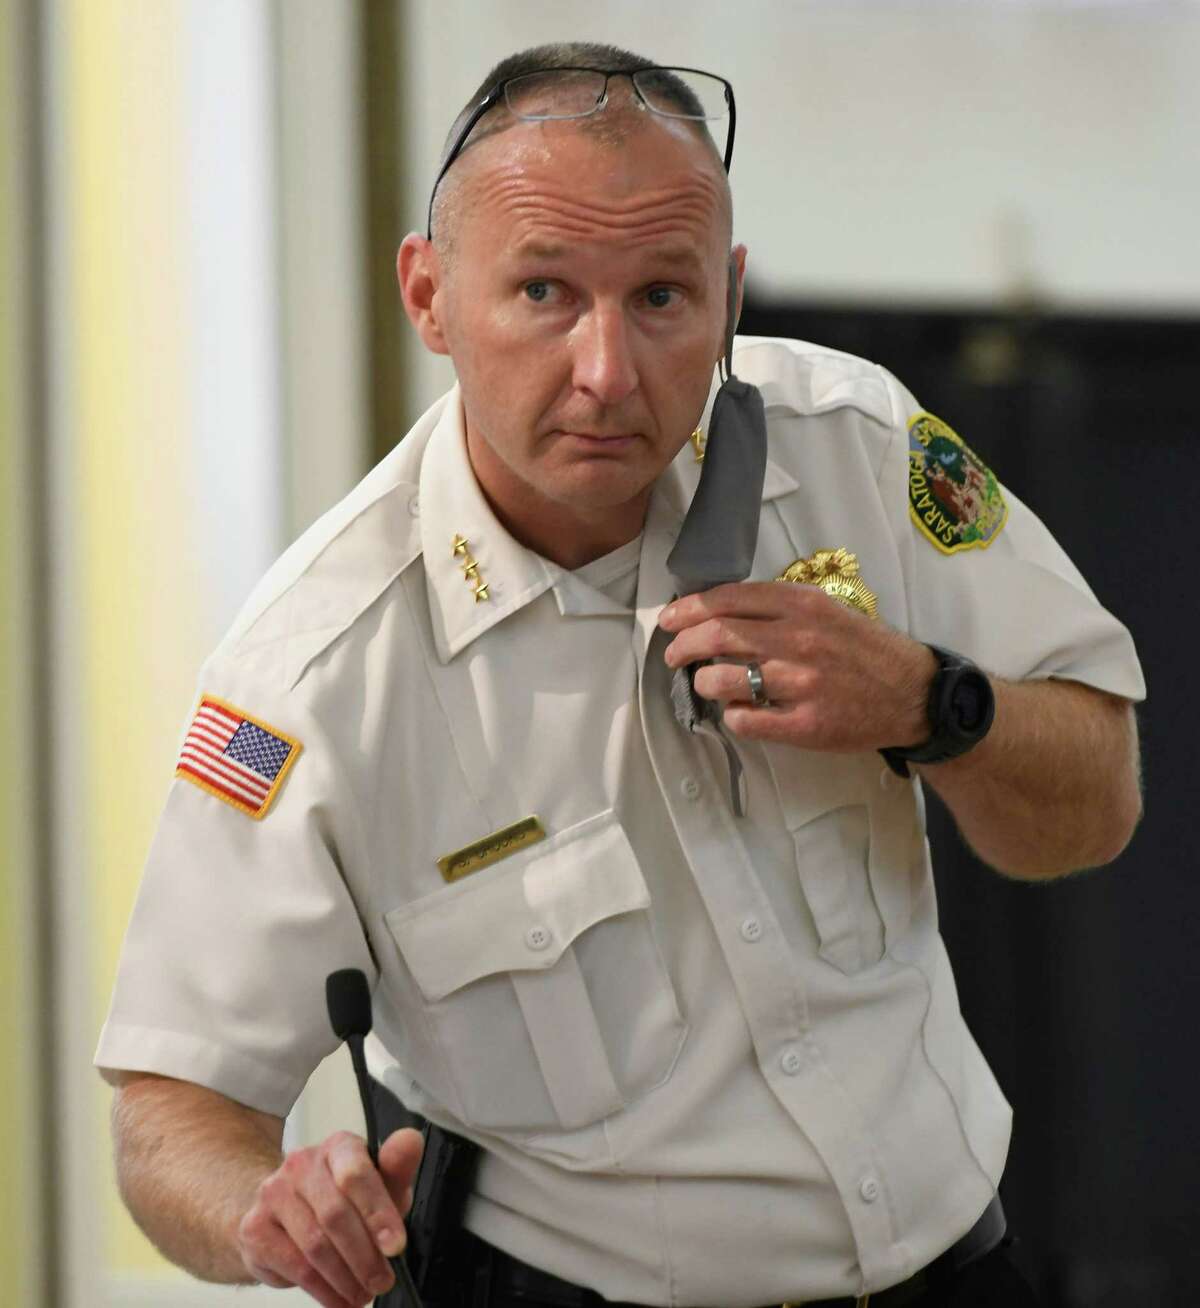 Saratoga Springs police chief Shane Crooks said police used no force on the Black Army Captain who filed a complaint about his treatment. (Jenn March, Special to the Times Union)